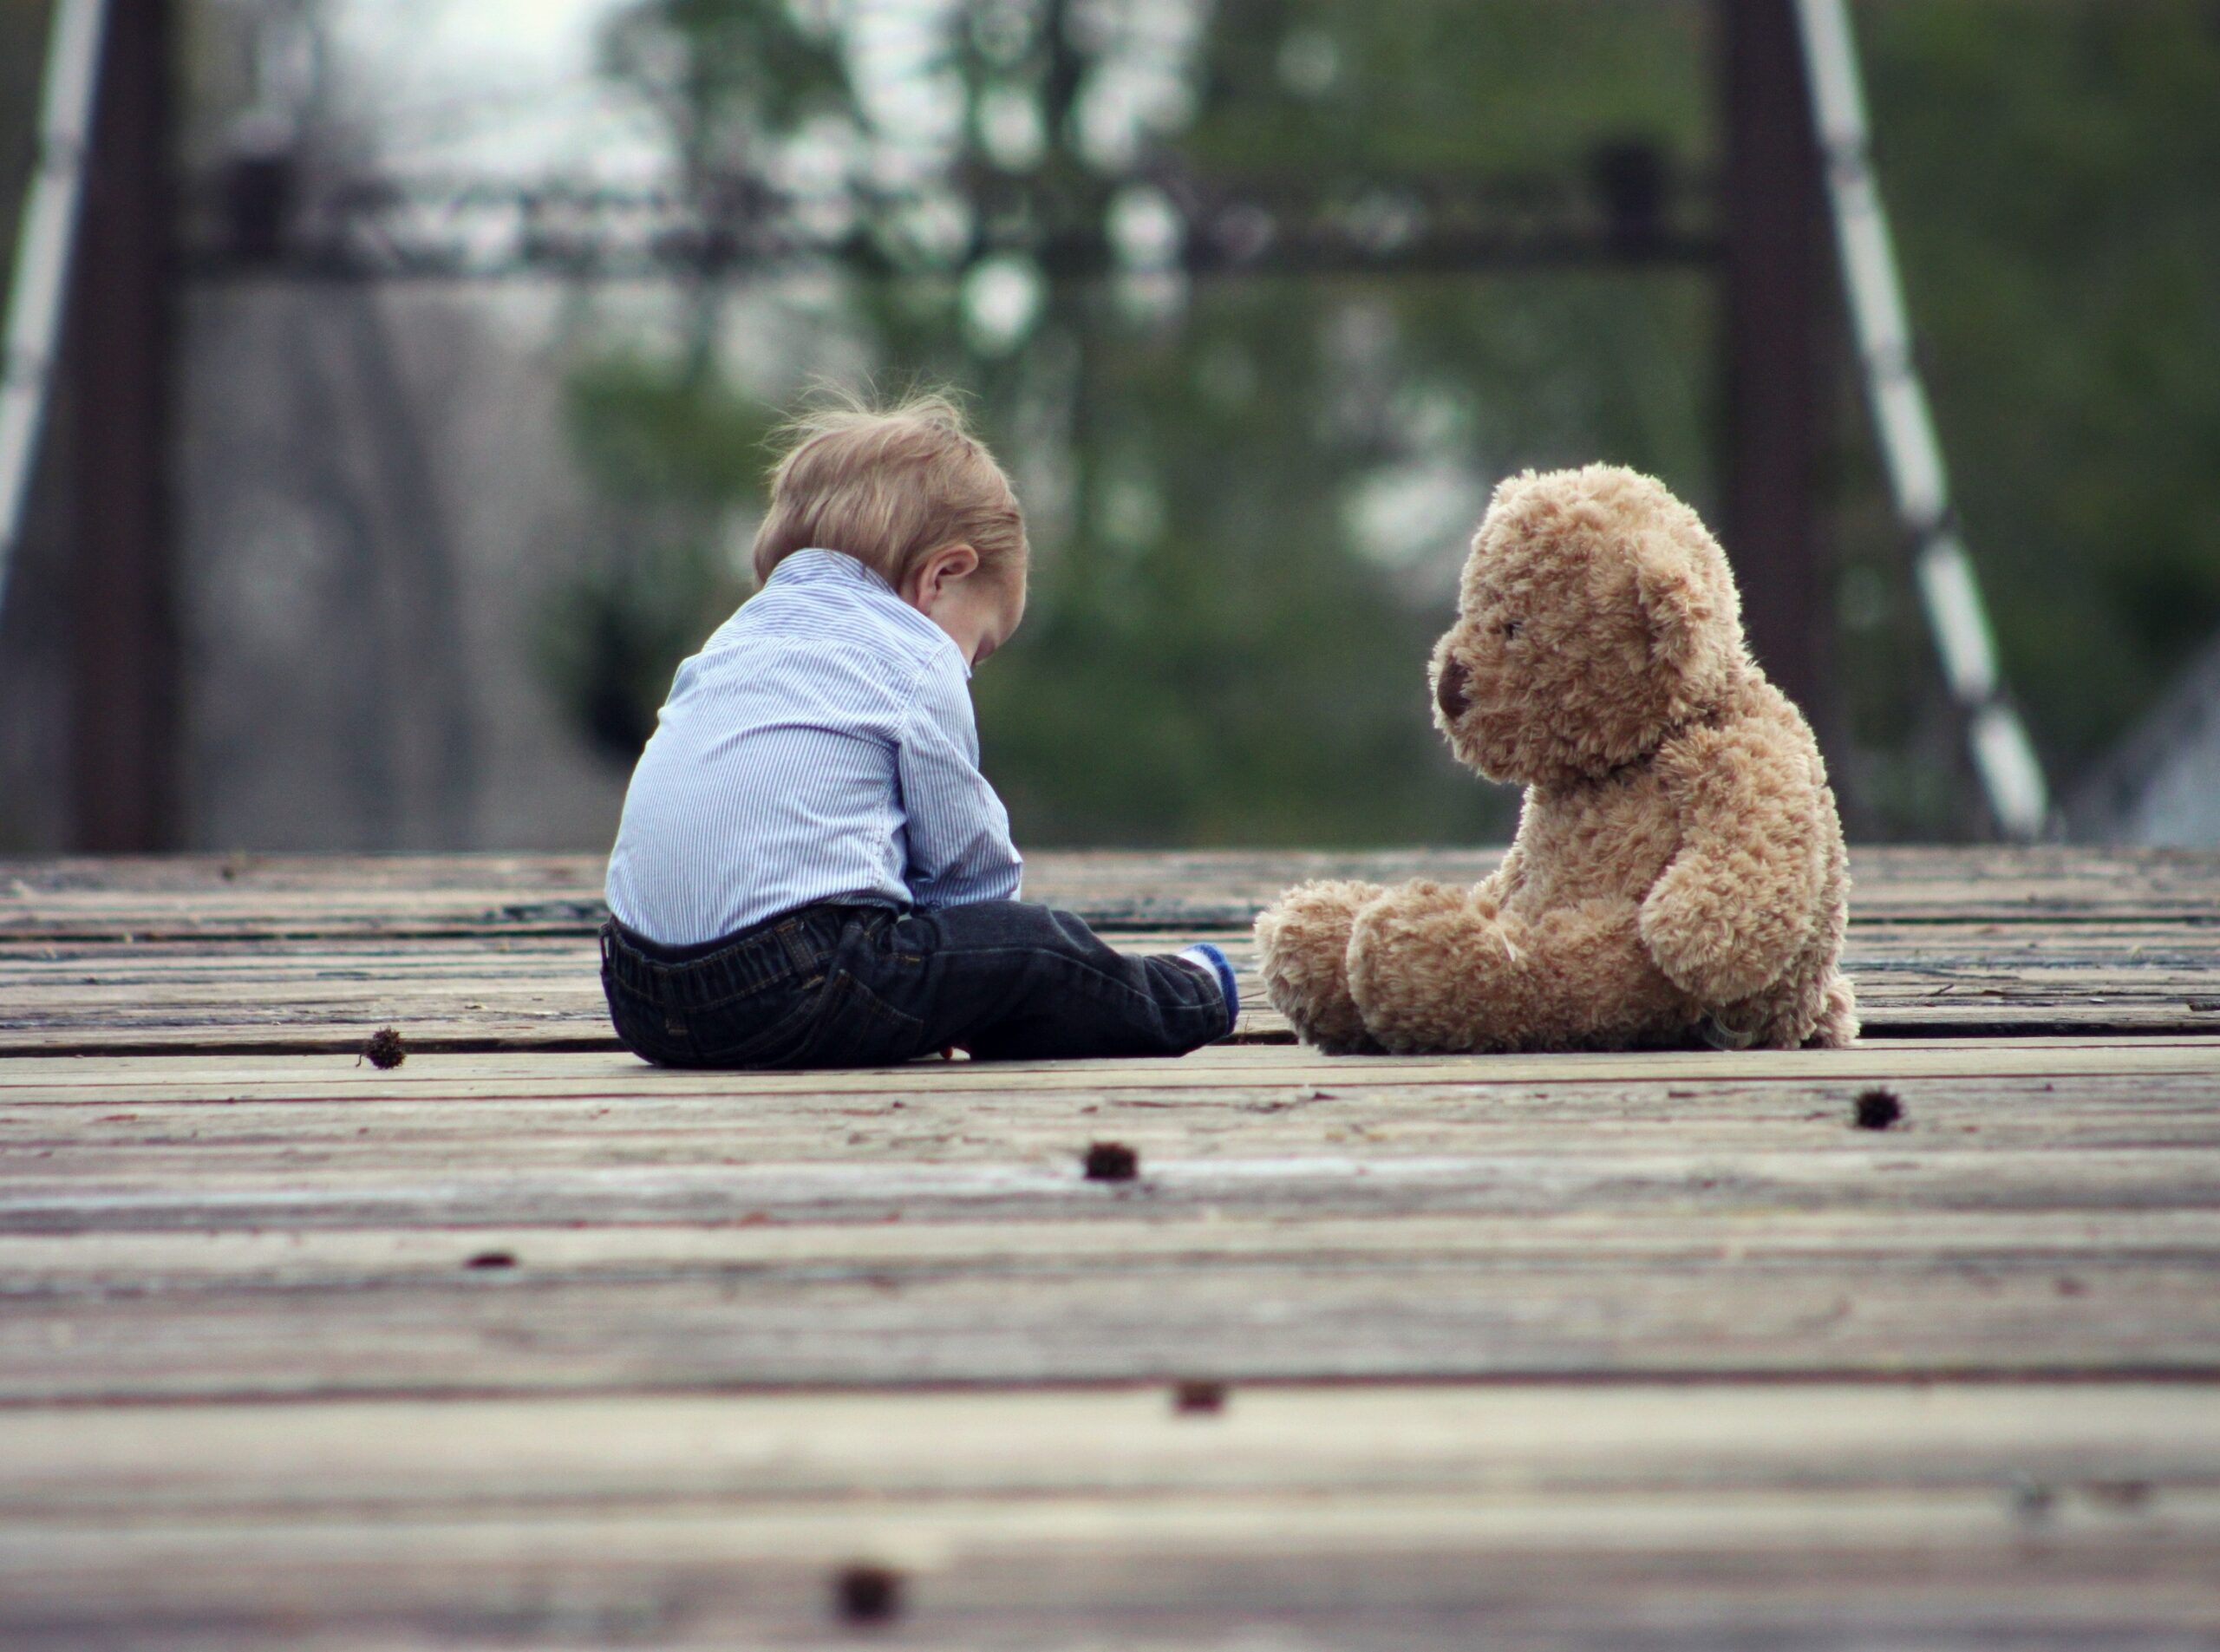 When it comes to emotional neglect, many things can be done to help the child. One of the most important things is to create a safe and stable environment for them.